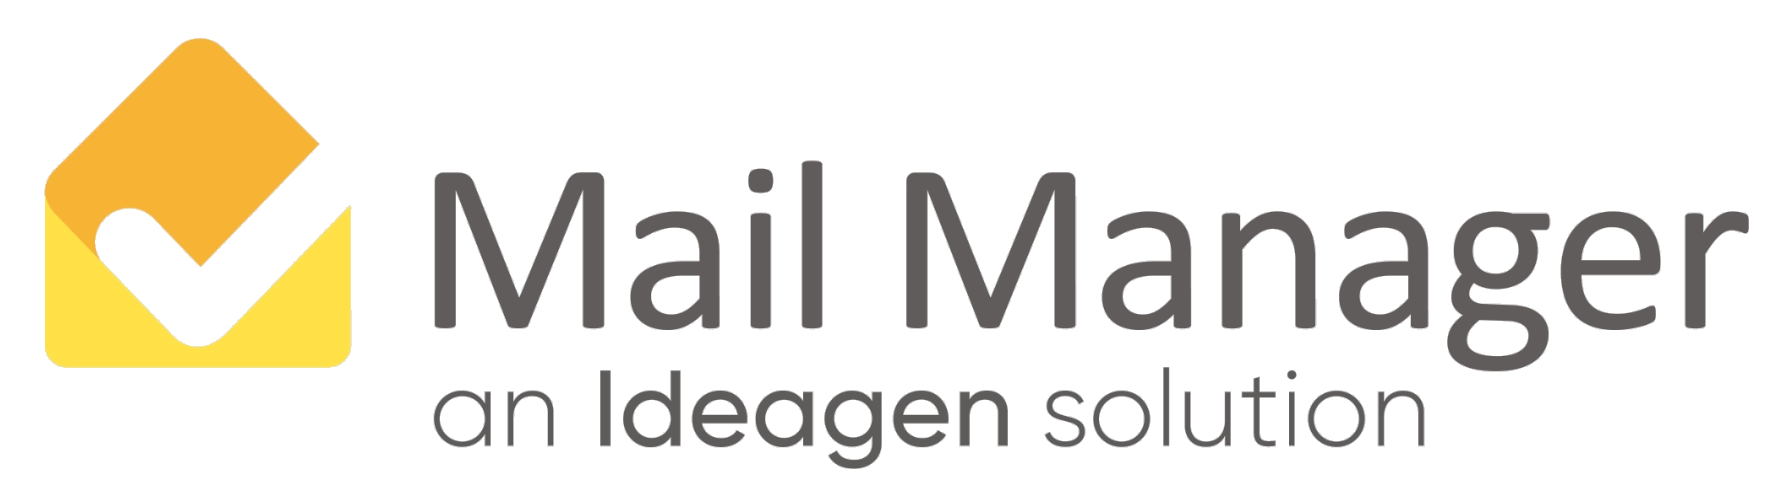 mail manager_logo